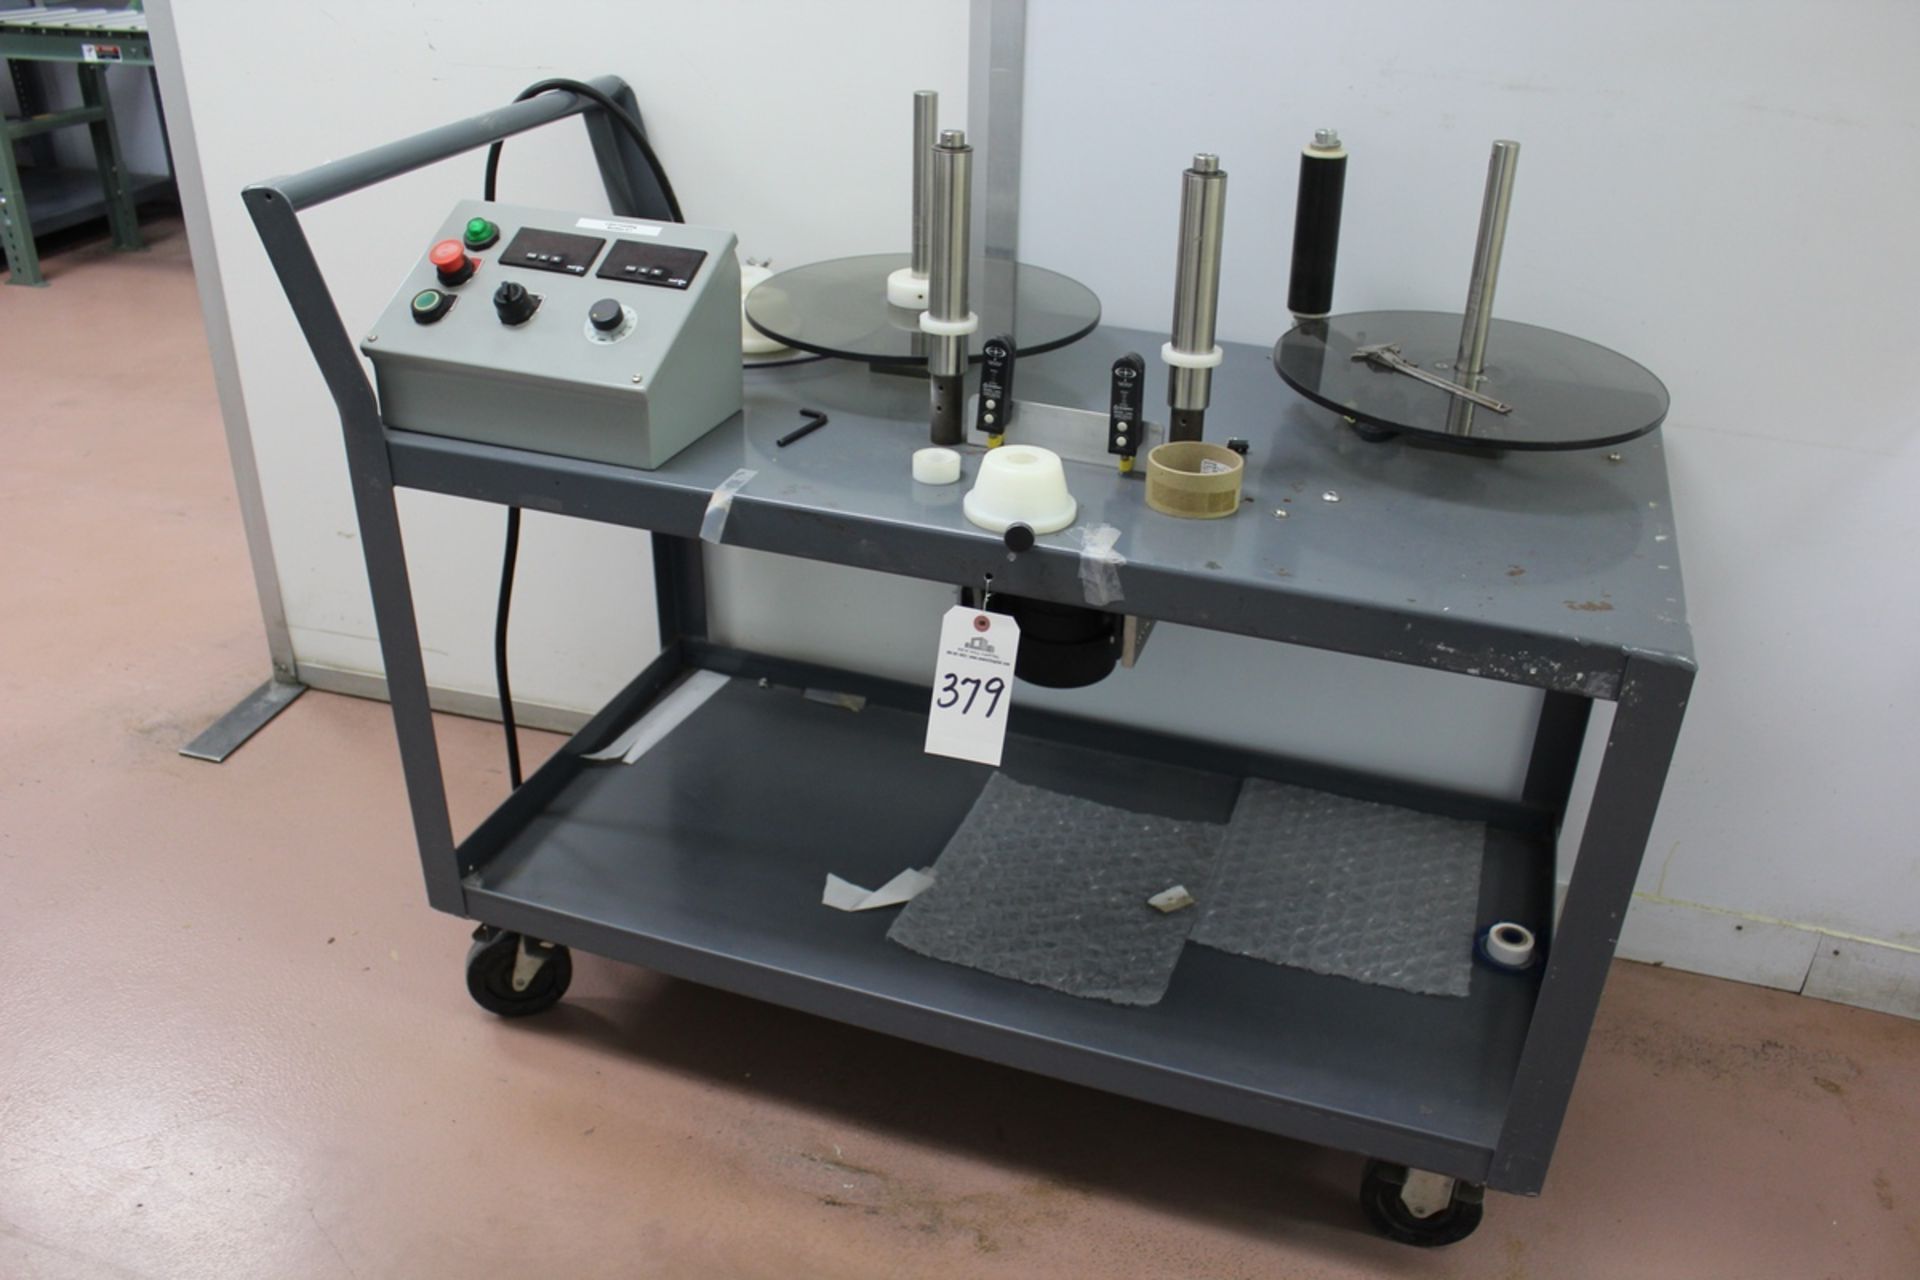 MOBILE LABEL COUNTING / LOADING STATION | Reqd Rig Fee: $50 or HC